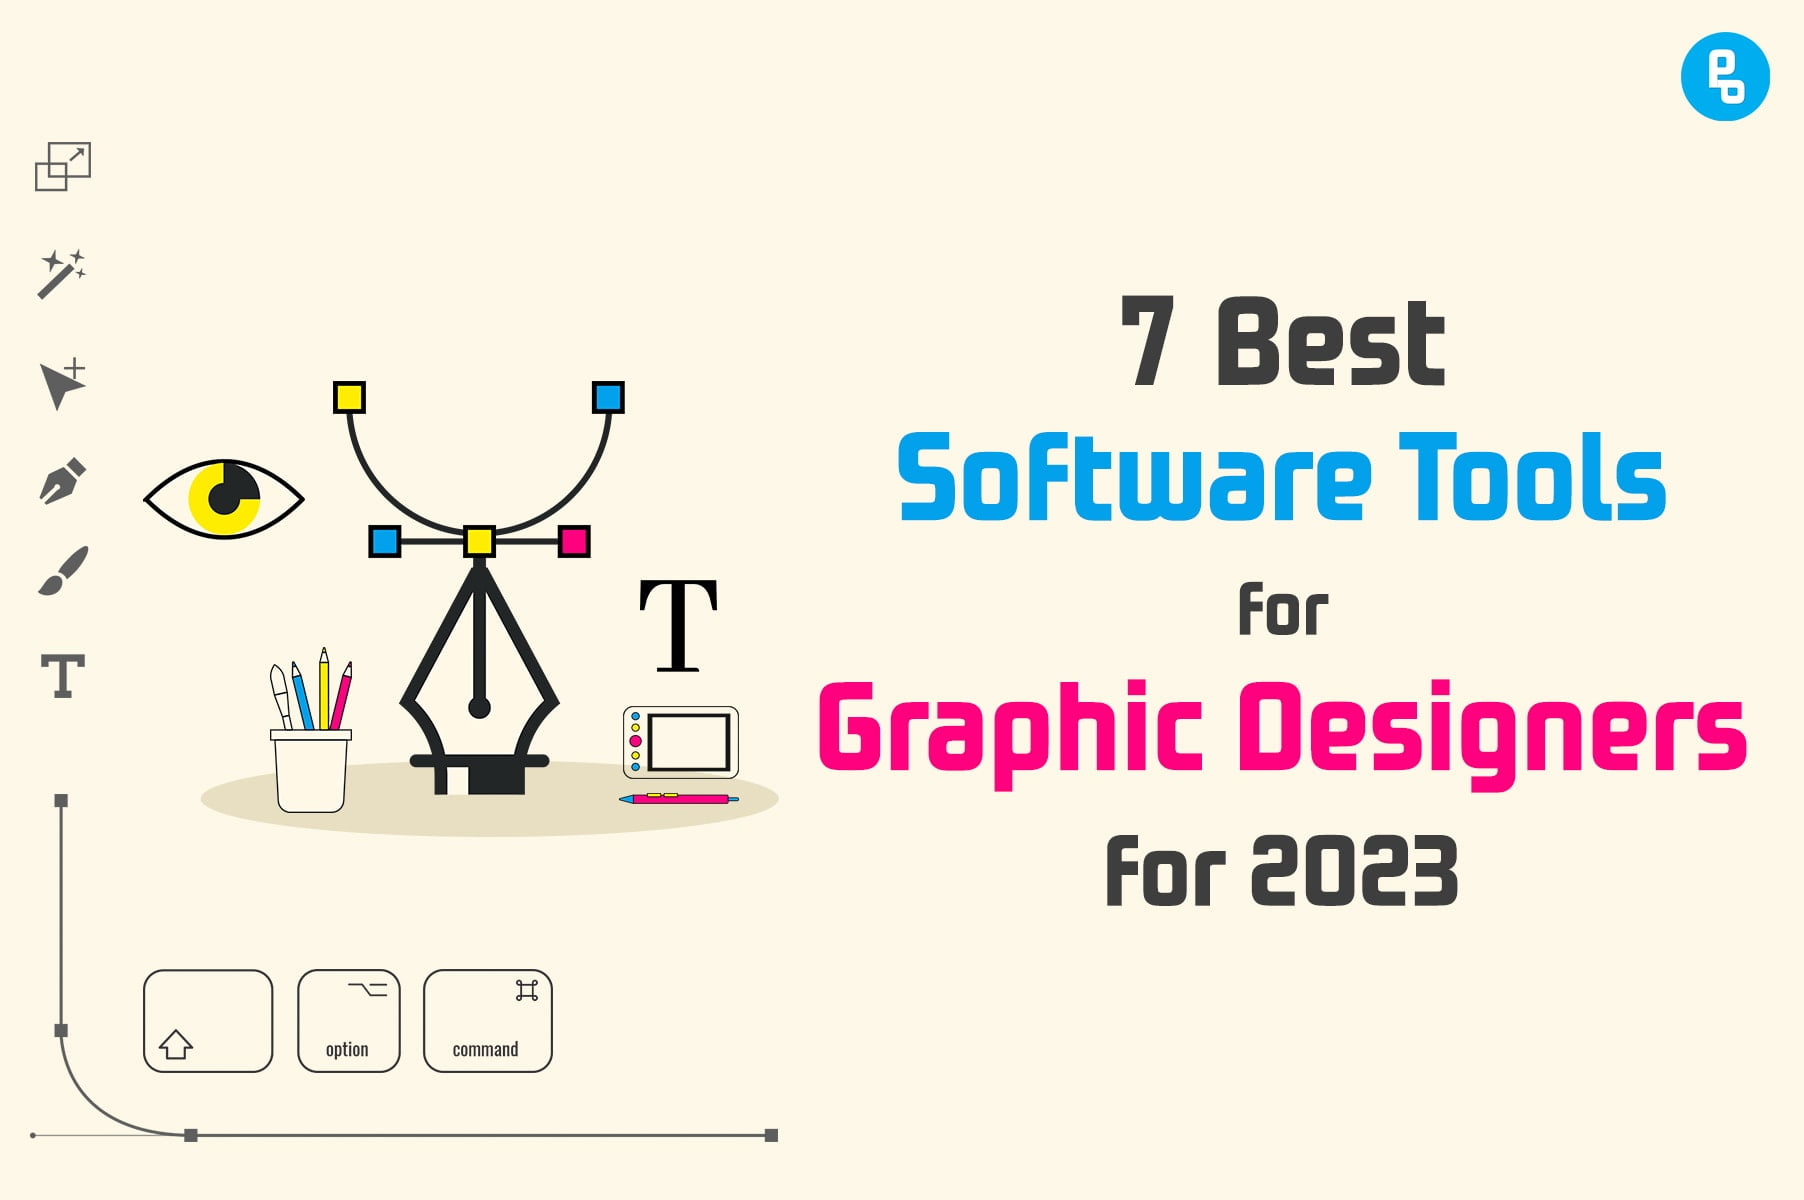 7 Best Softwares For Graphic Designers in 2023